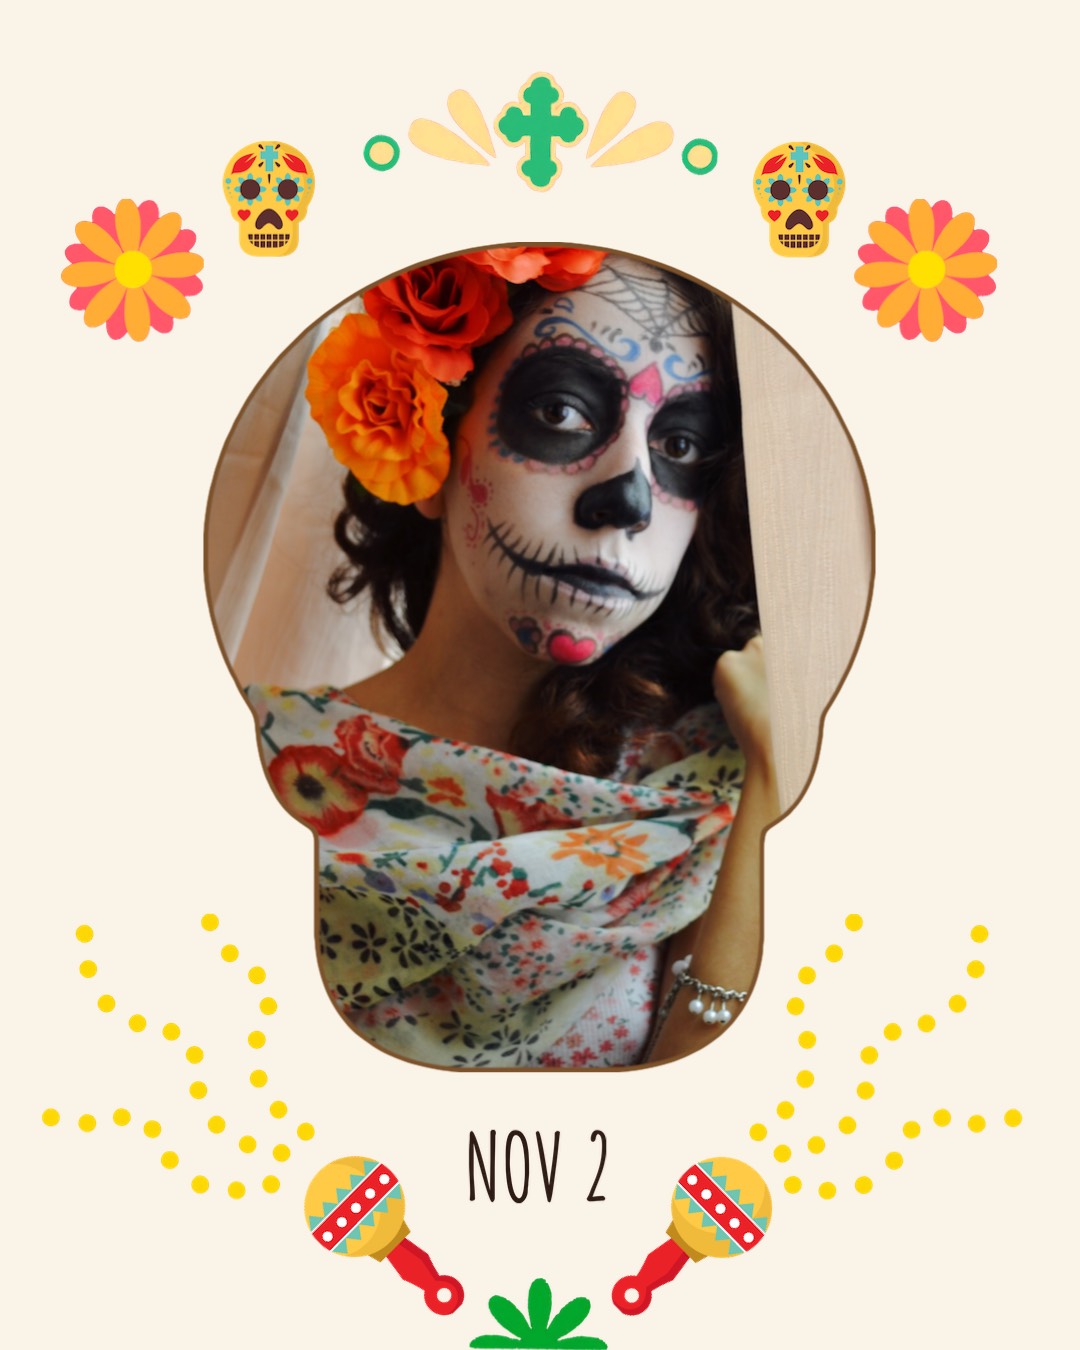 A Woman With A Skull Make Up And Flowers In Her Hair Day Of The Dead Template